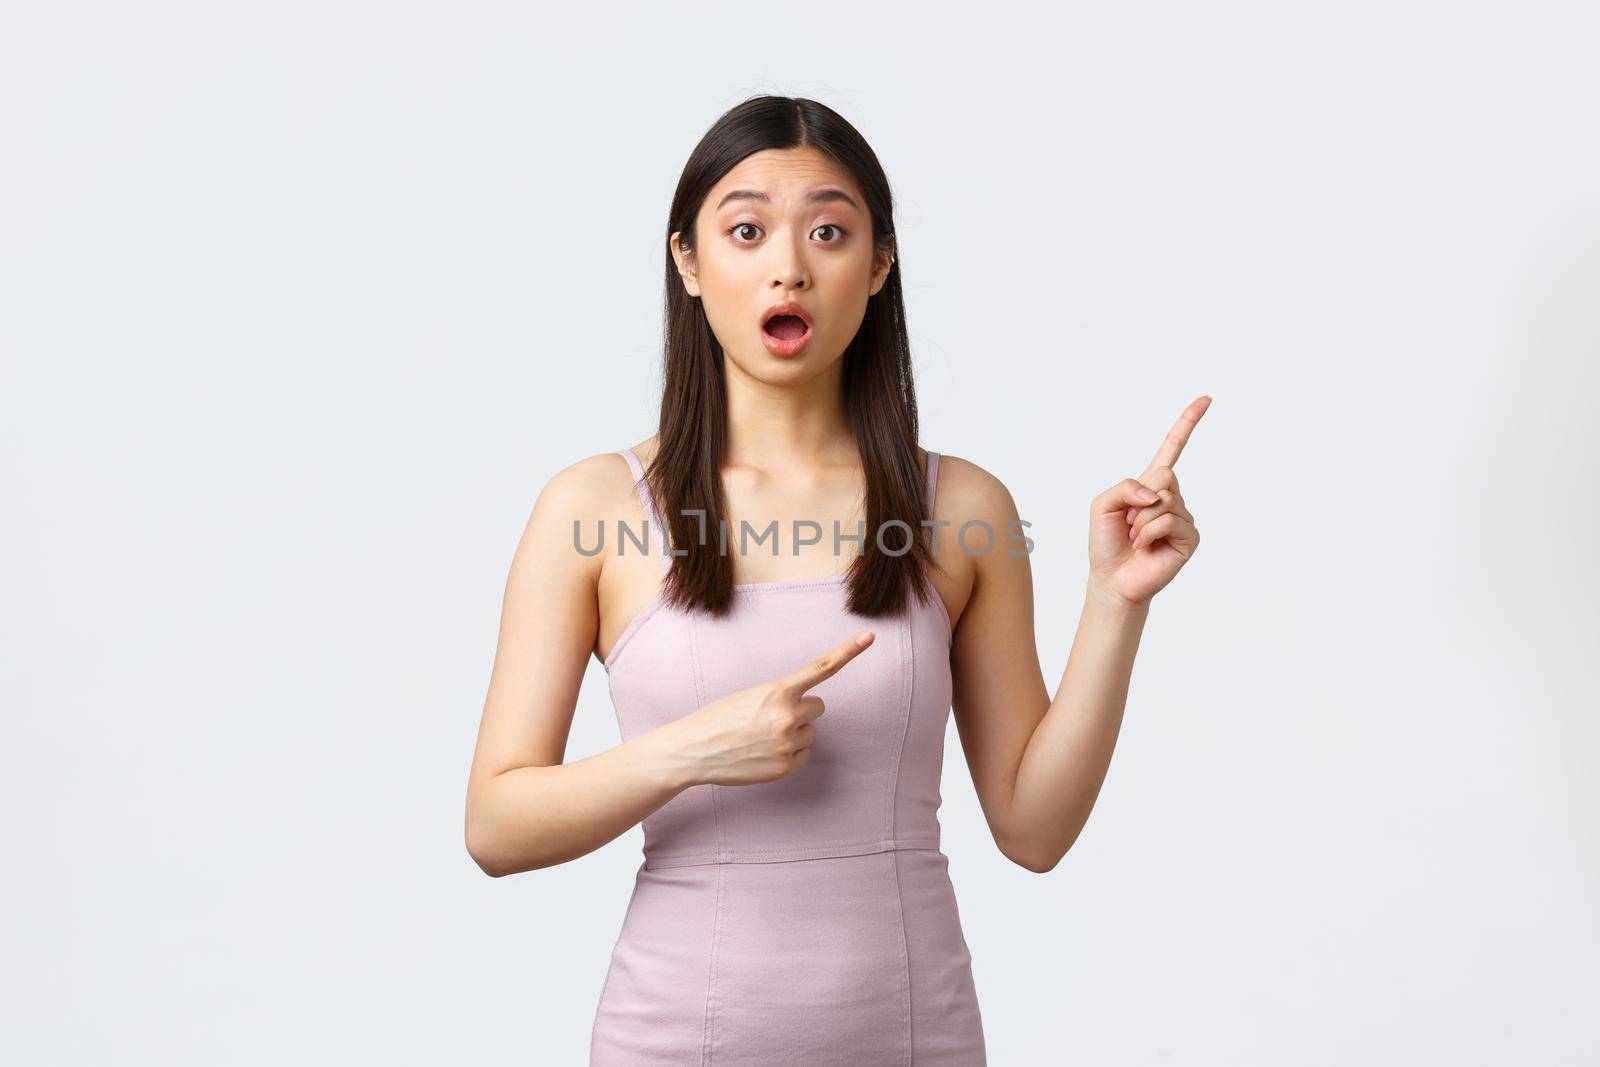 Luxury women, party and holidays concept. Excited and worried cute asian woman asking question or advice about event, wear evening dress and pointing fingers upper right corner.